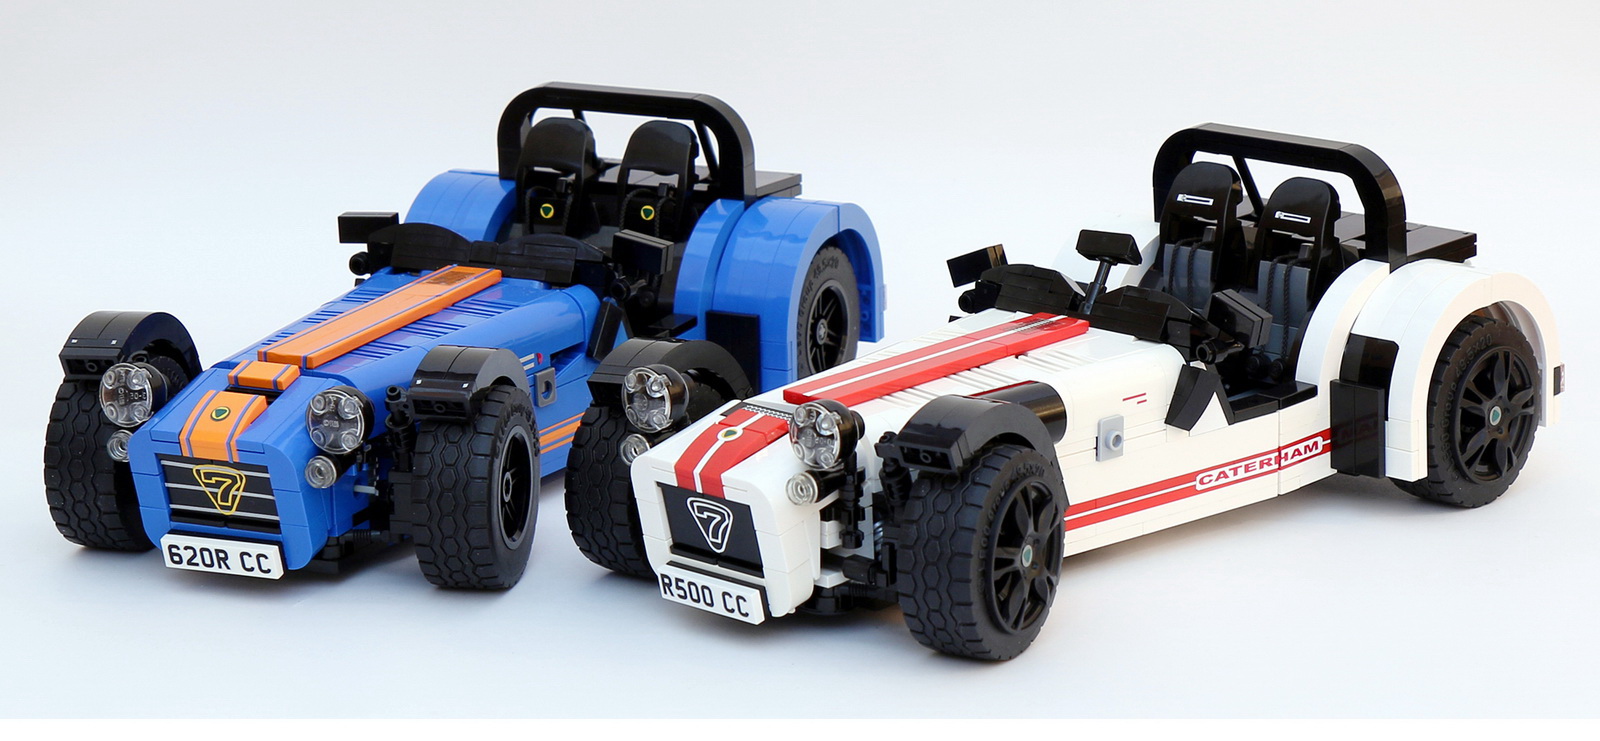 Real Caterham Seven Too Difficult To Build? Lego Launches Official Set